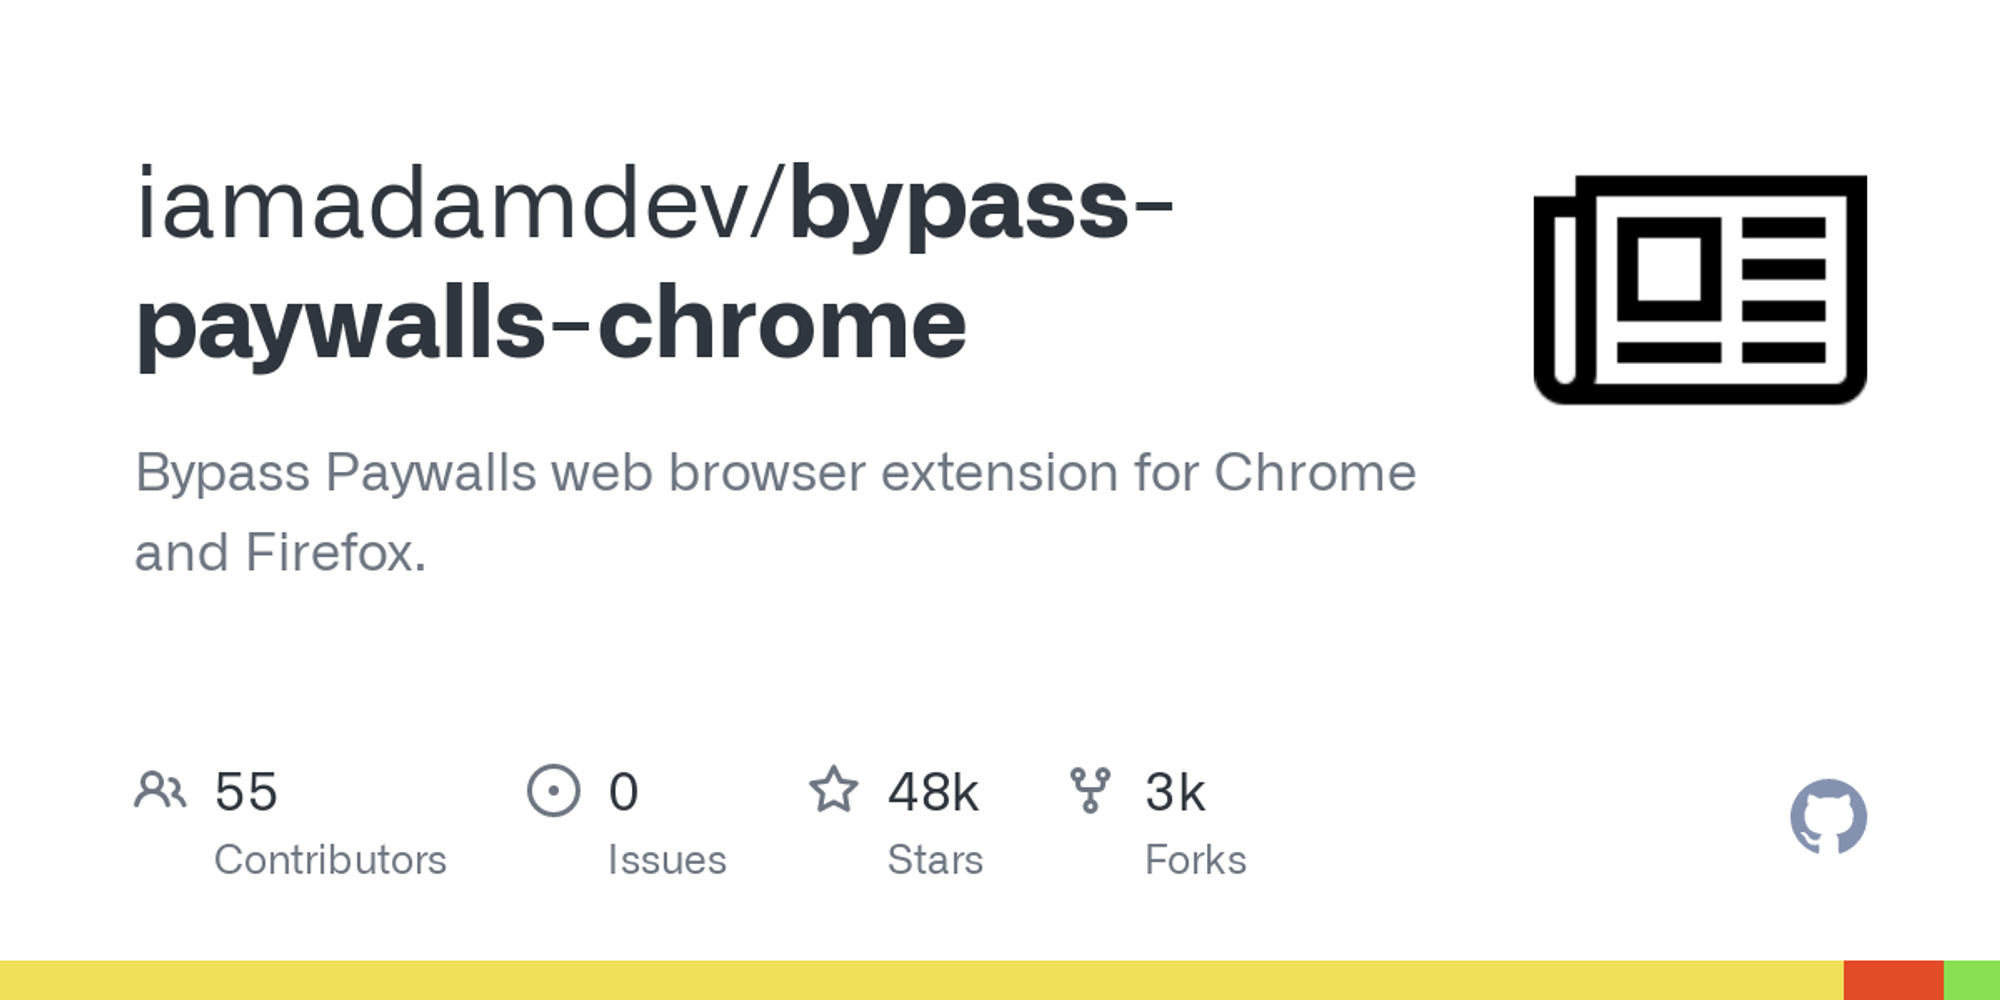 GitHub - iamadamdev/bypass-paywalls-chrome: Bypass Paywalls web browser extension for Chrome and Firefox.